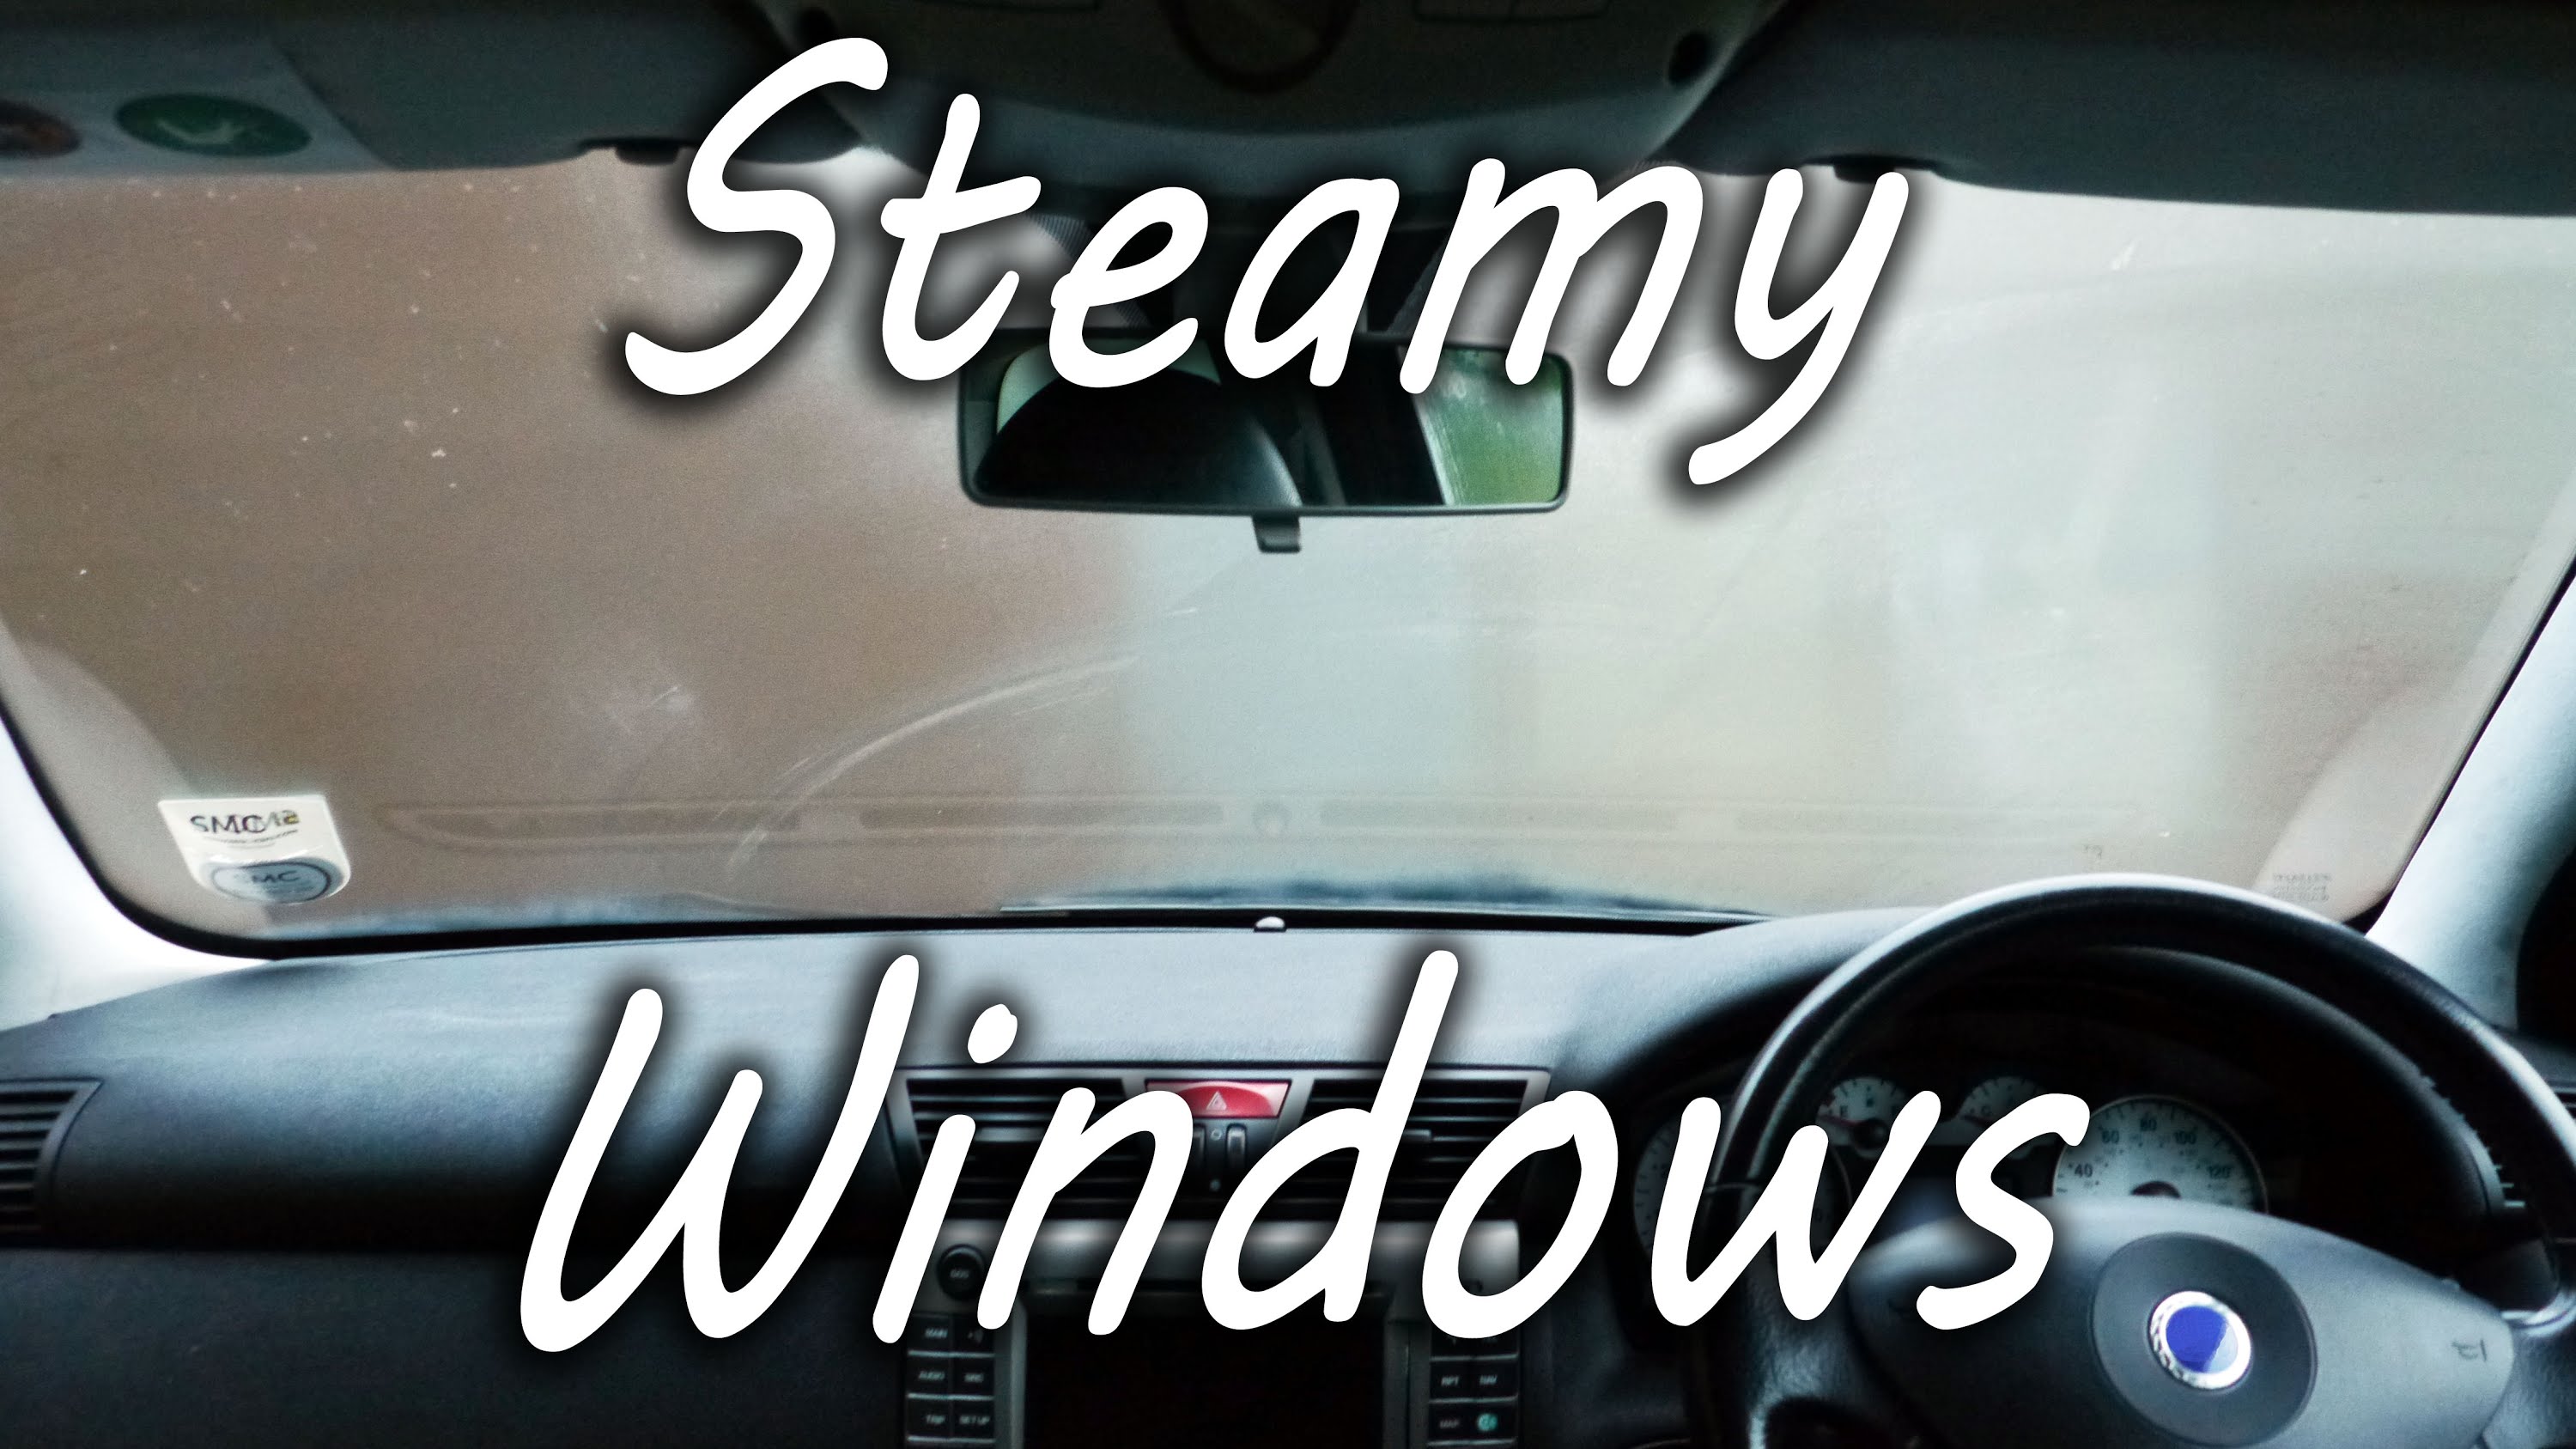 How to Stop Car Windows Steaming Up - YouTube